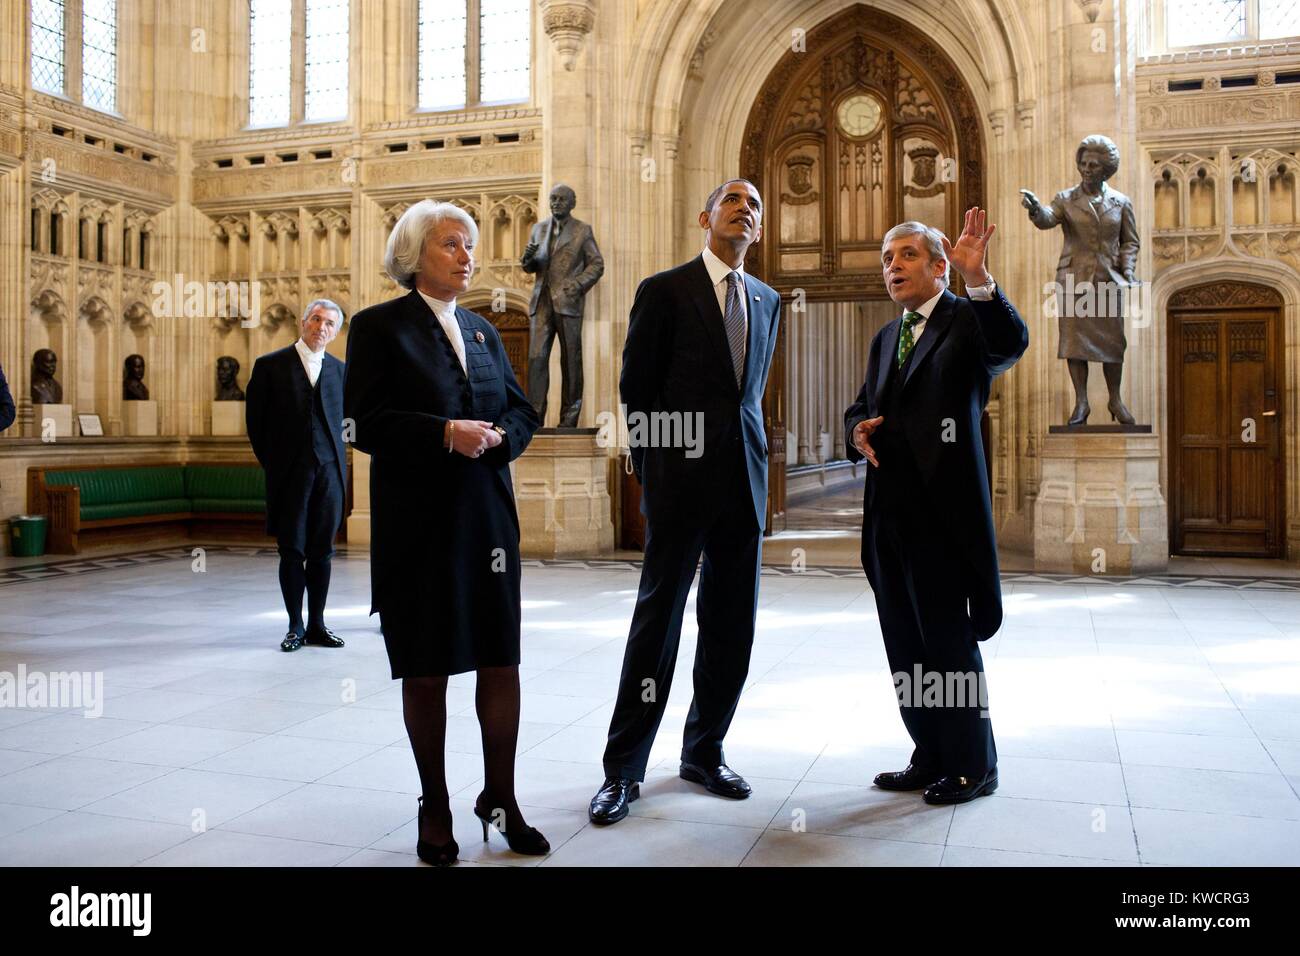 President Barack Obama tours the House of Commons Members' Lobby at Parliament in London. Commons Speaker John Bercow, and Lords Speaker Baroness Haymanare his guides. May 25, 2011. (BSLOC 2015 3 220) Stock Photo